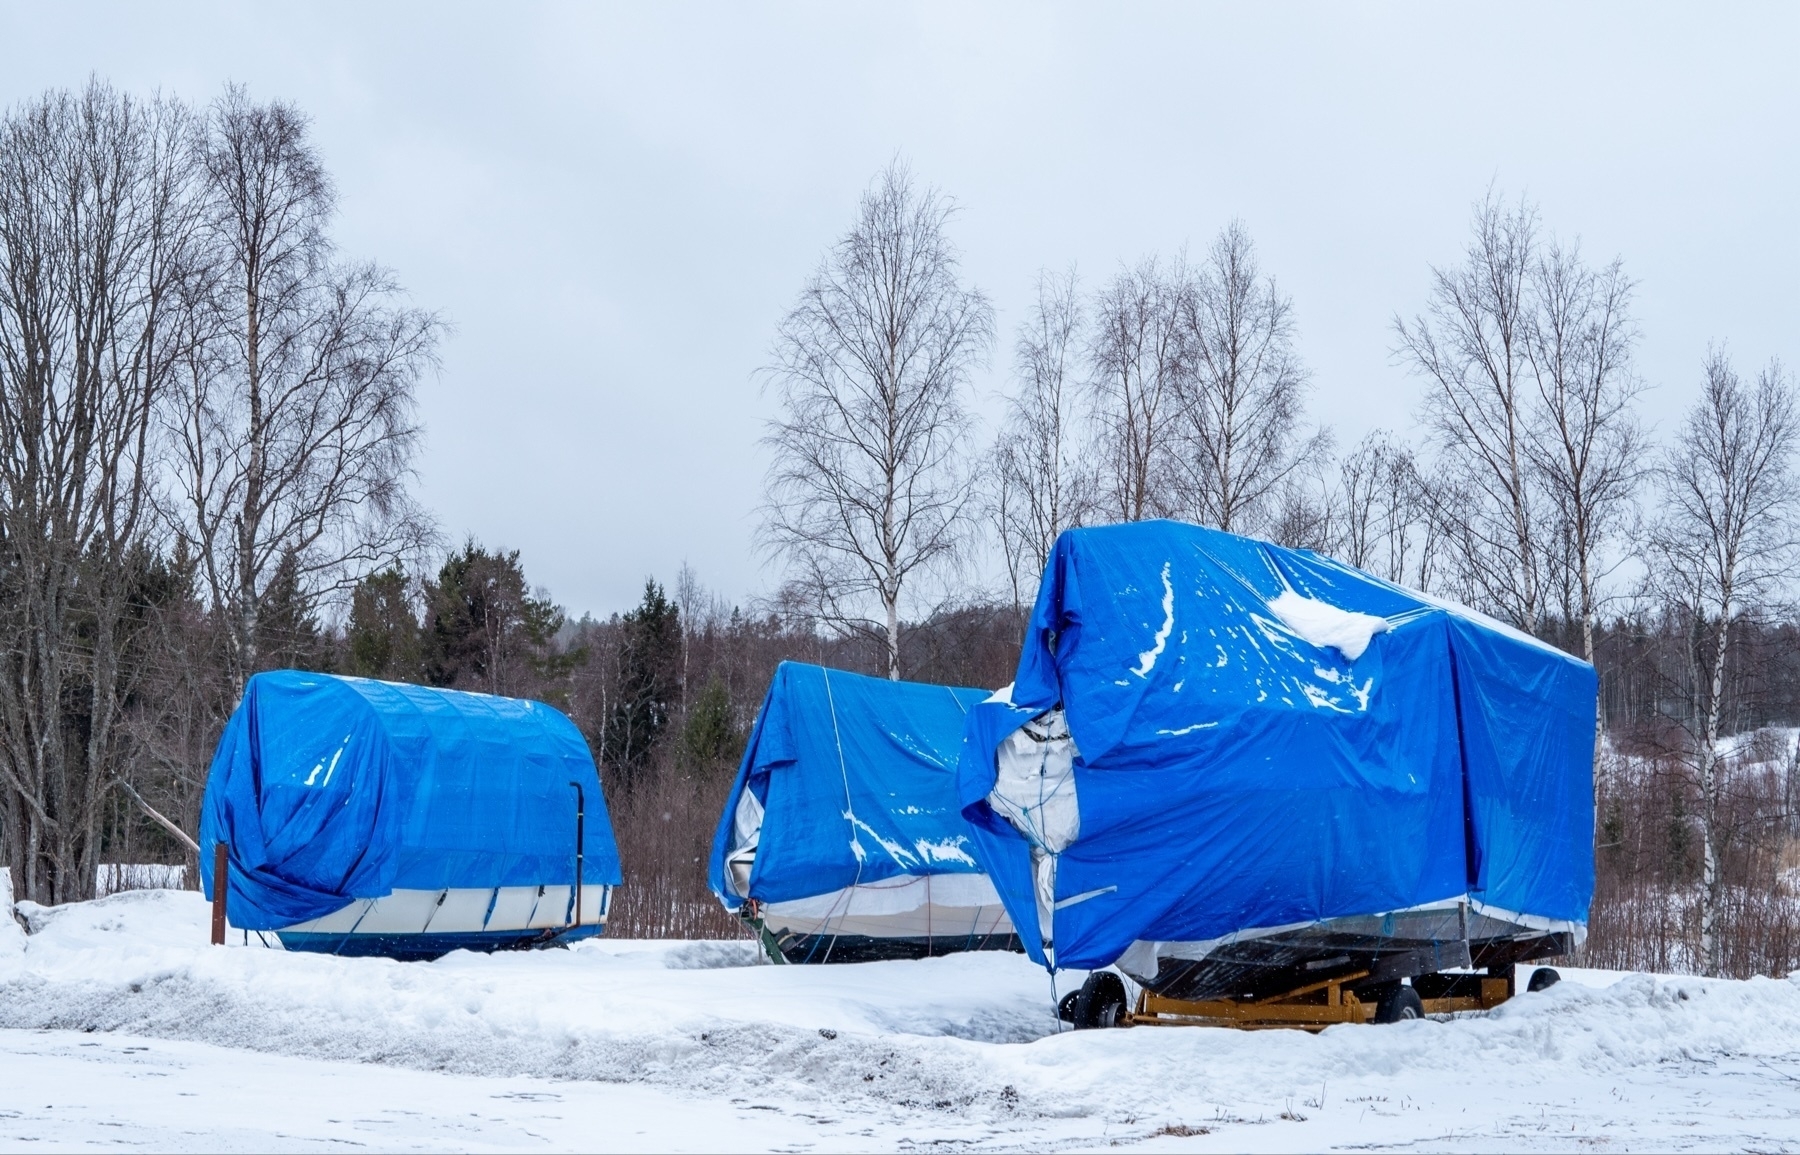 Boats covered with blue tarps on a snowy landscape with bare trees in the background.